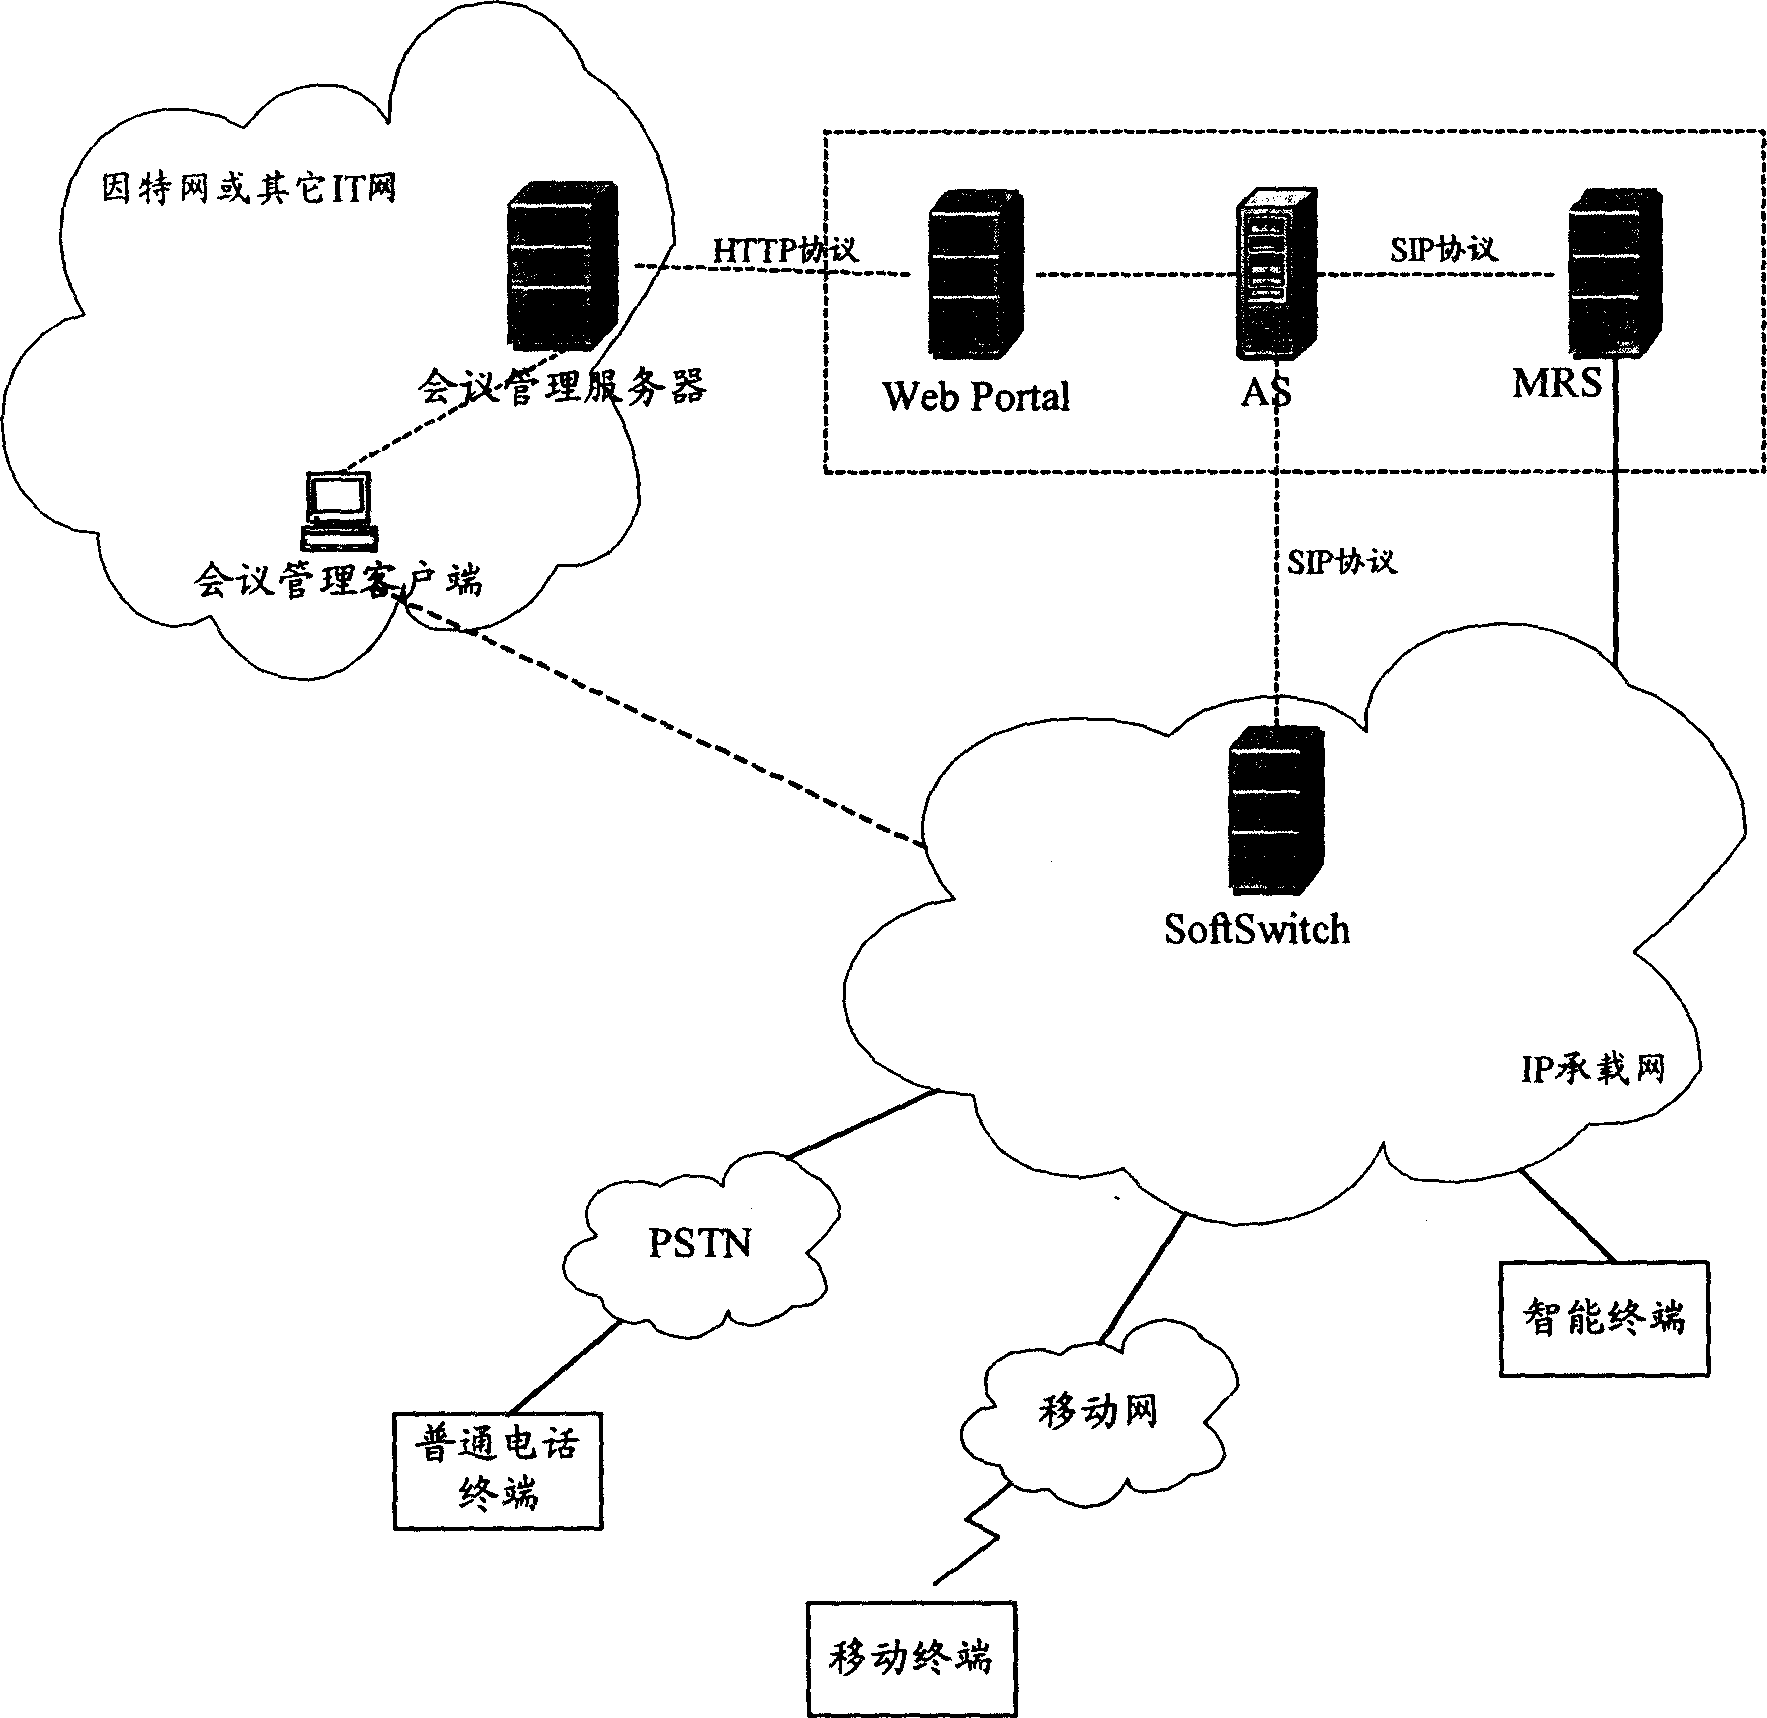 Method for realizing muti-part meeting through uest generation network